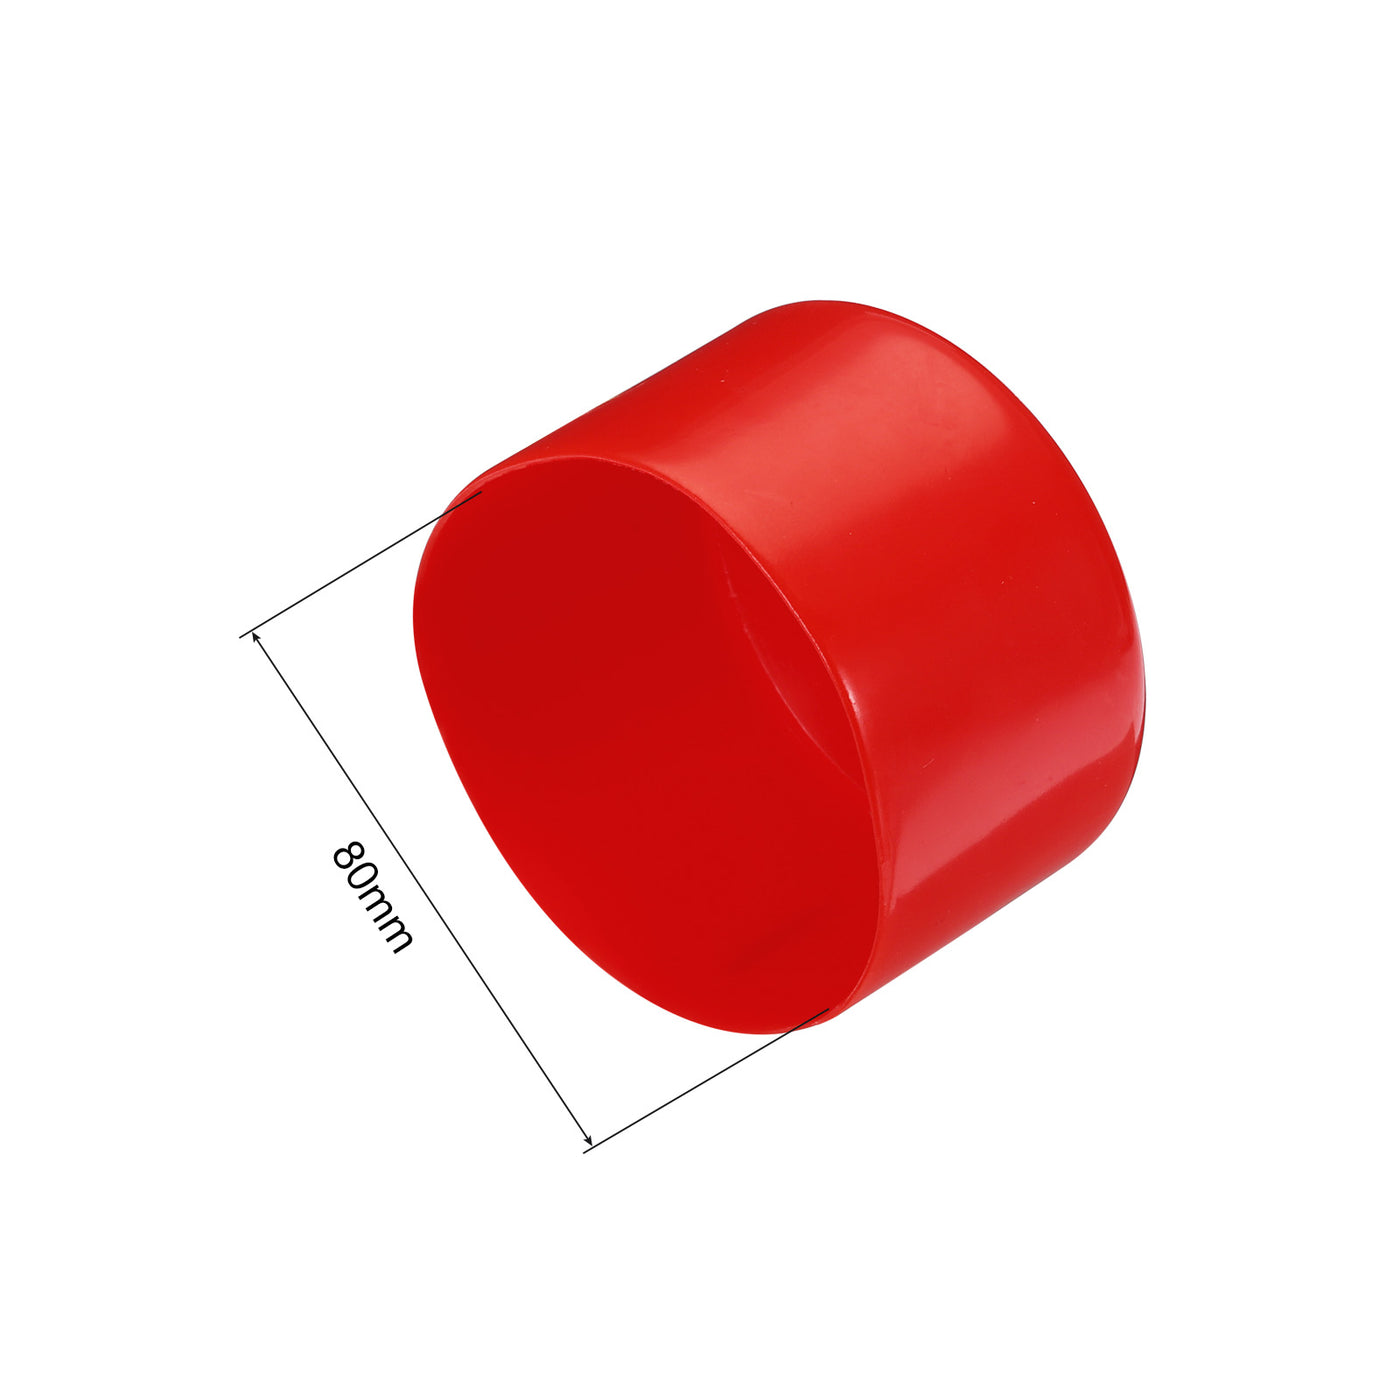 uxcell Uxcell 2pcs Rubber End Caps 80mm ID Vinyl Round Tube Bolt Cap Cover Screw Thread Protectors Red